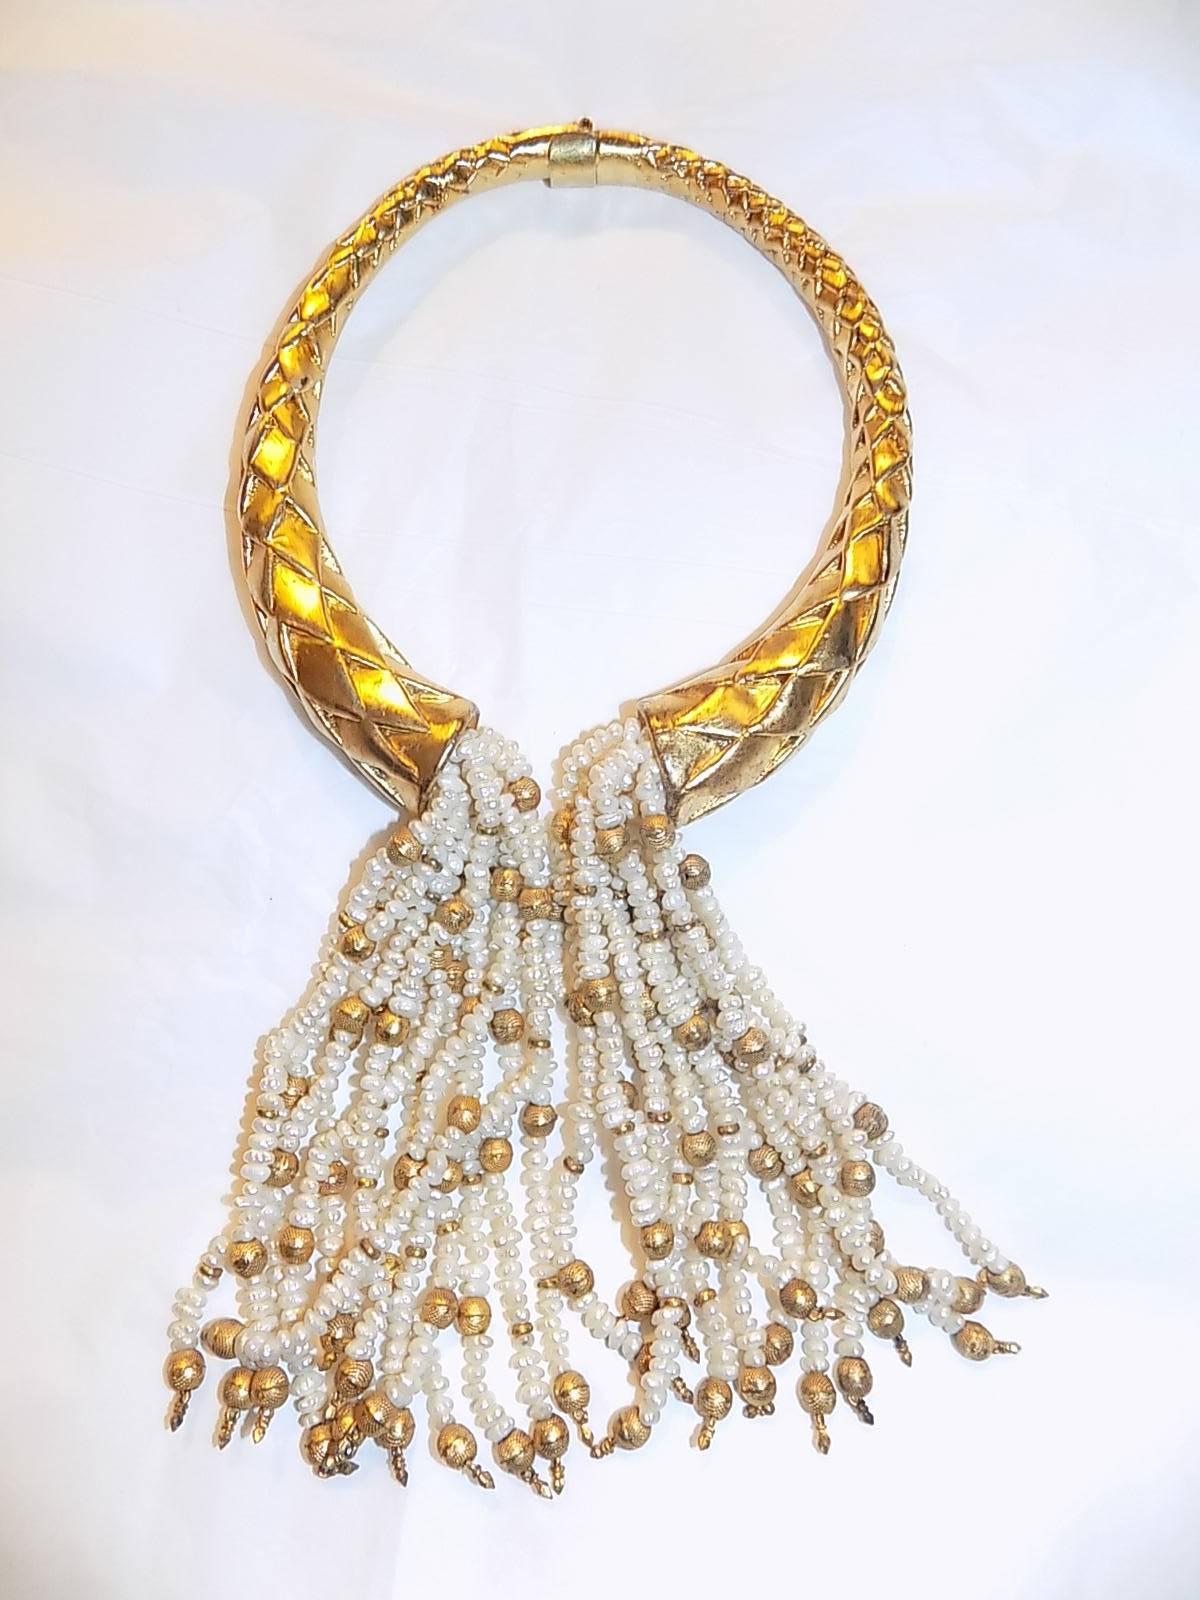 Spectacular massive vintage choker.  Amazing craftsmanship. Woven design on the sterling silver choker dipped in gold . 5 Inches long  clusters of pearls and gold beads falling down the front. tension  mechanism opening>. Solid sterling silver .